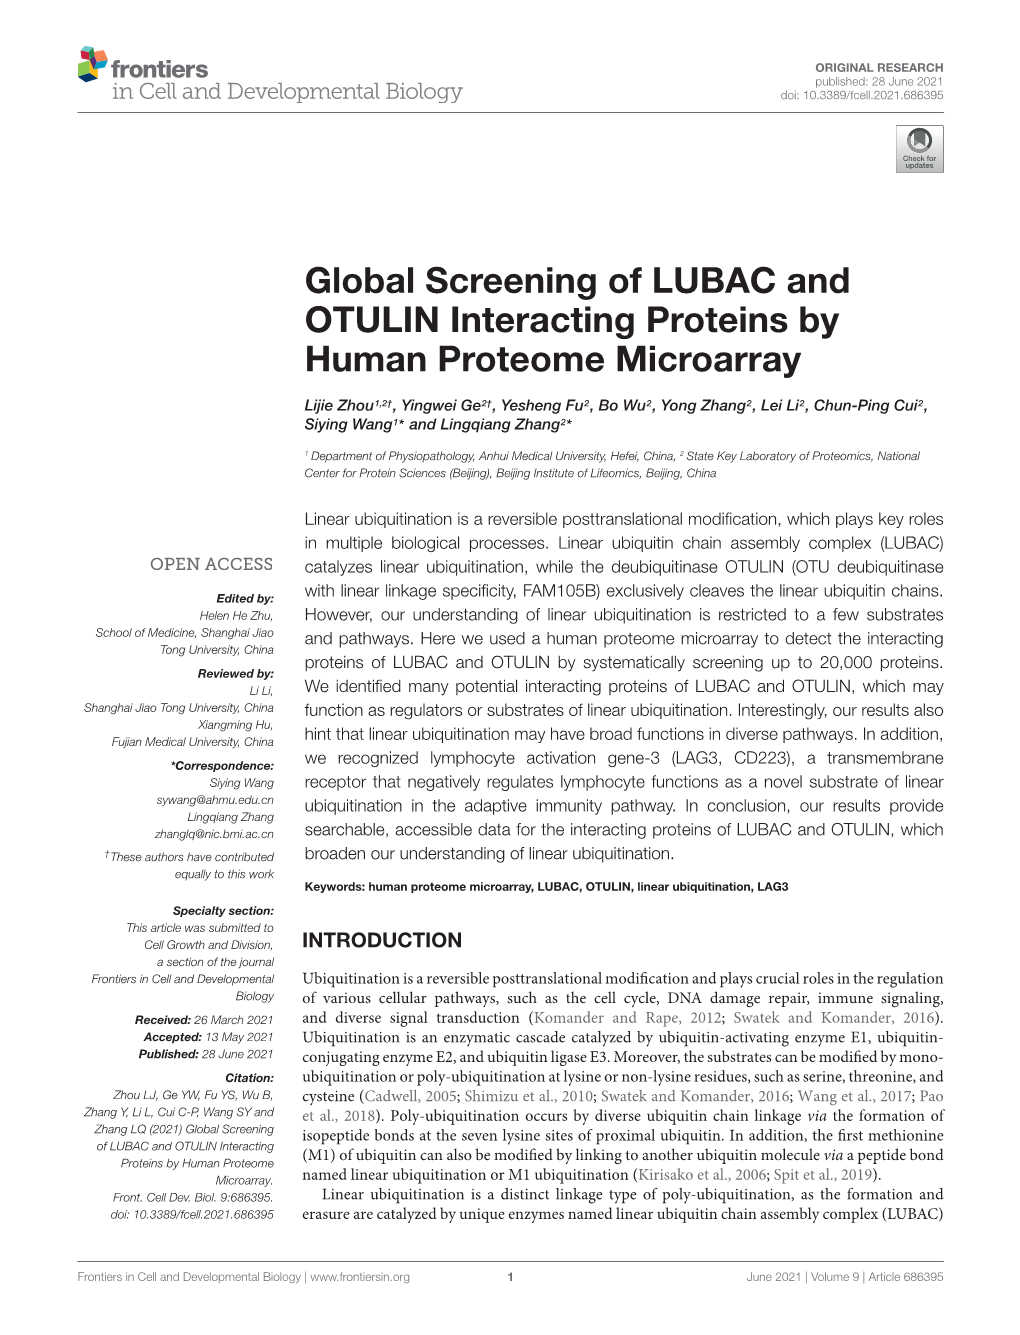 Global Screening of LUBAC and OTULIN Interacting Proteins by Human Proteome Microarray